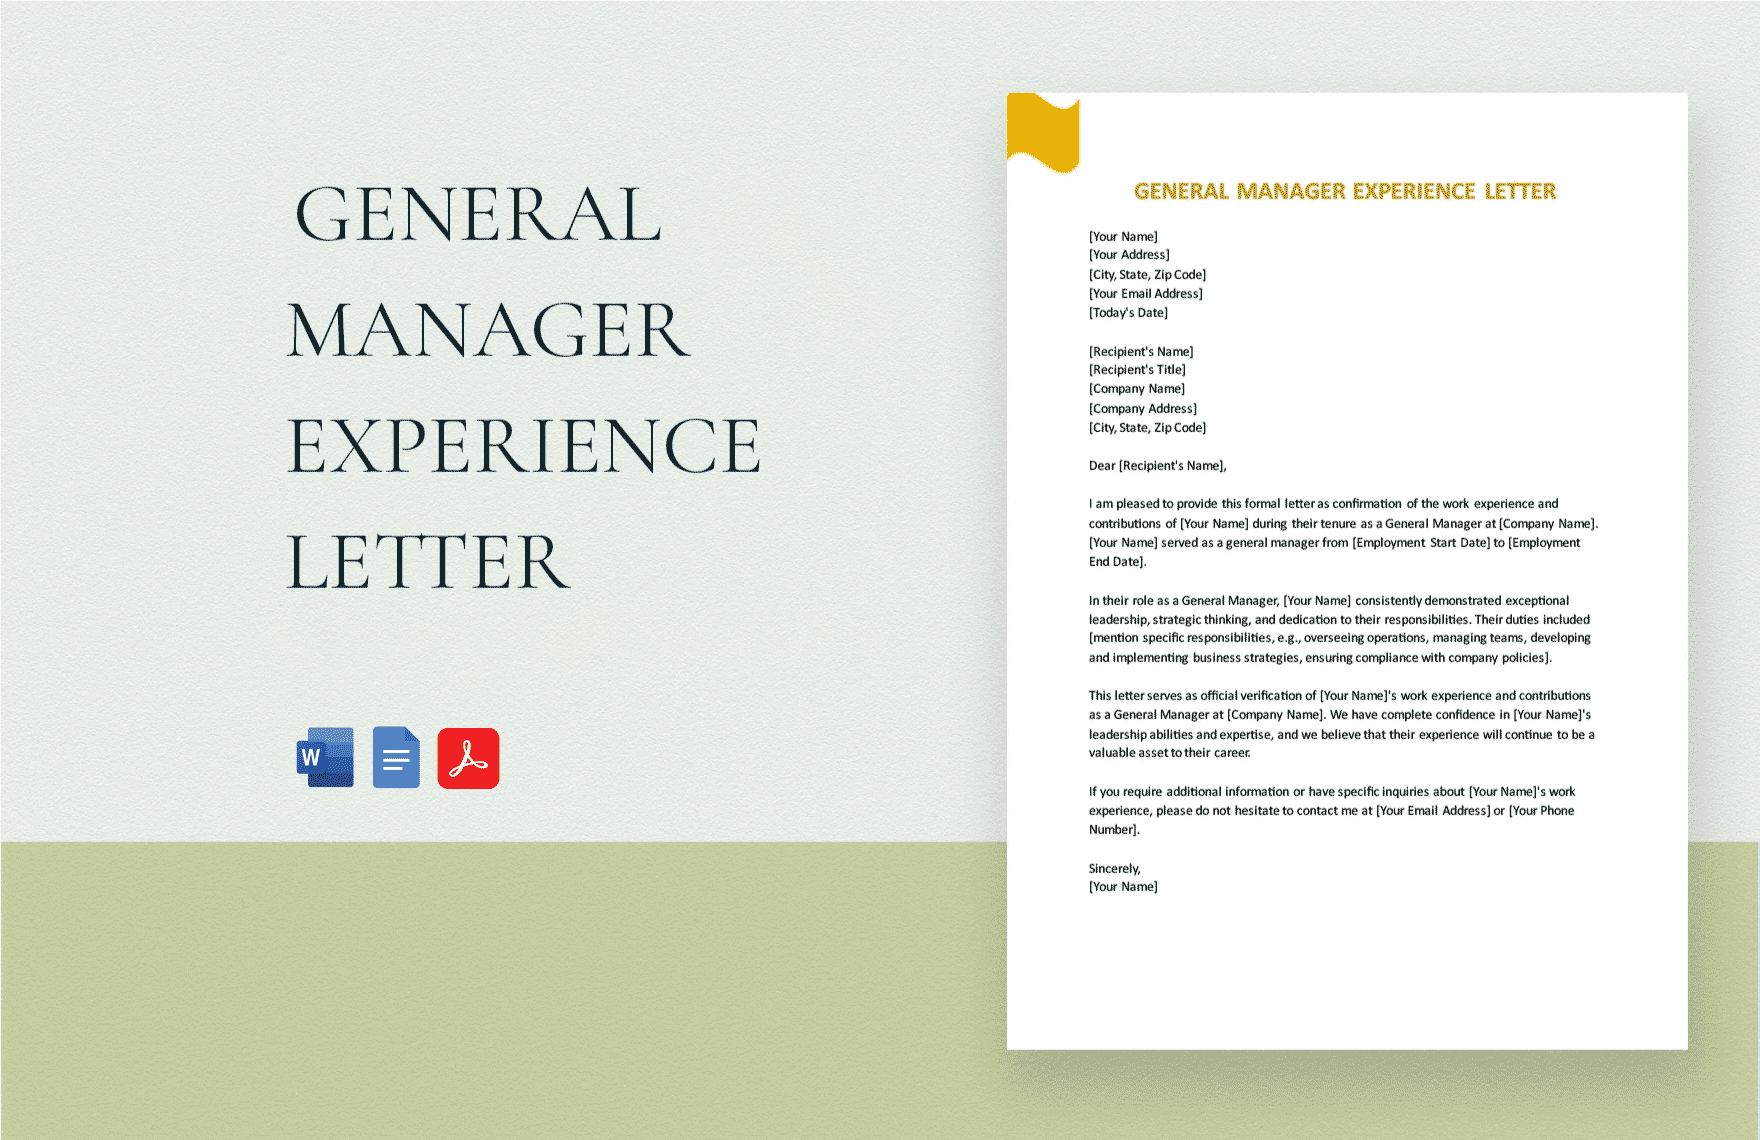 Free General Manager Experience Letter in Word, Google Docs, PDF